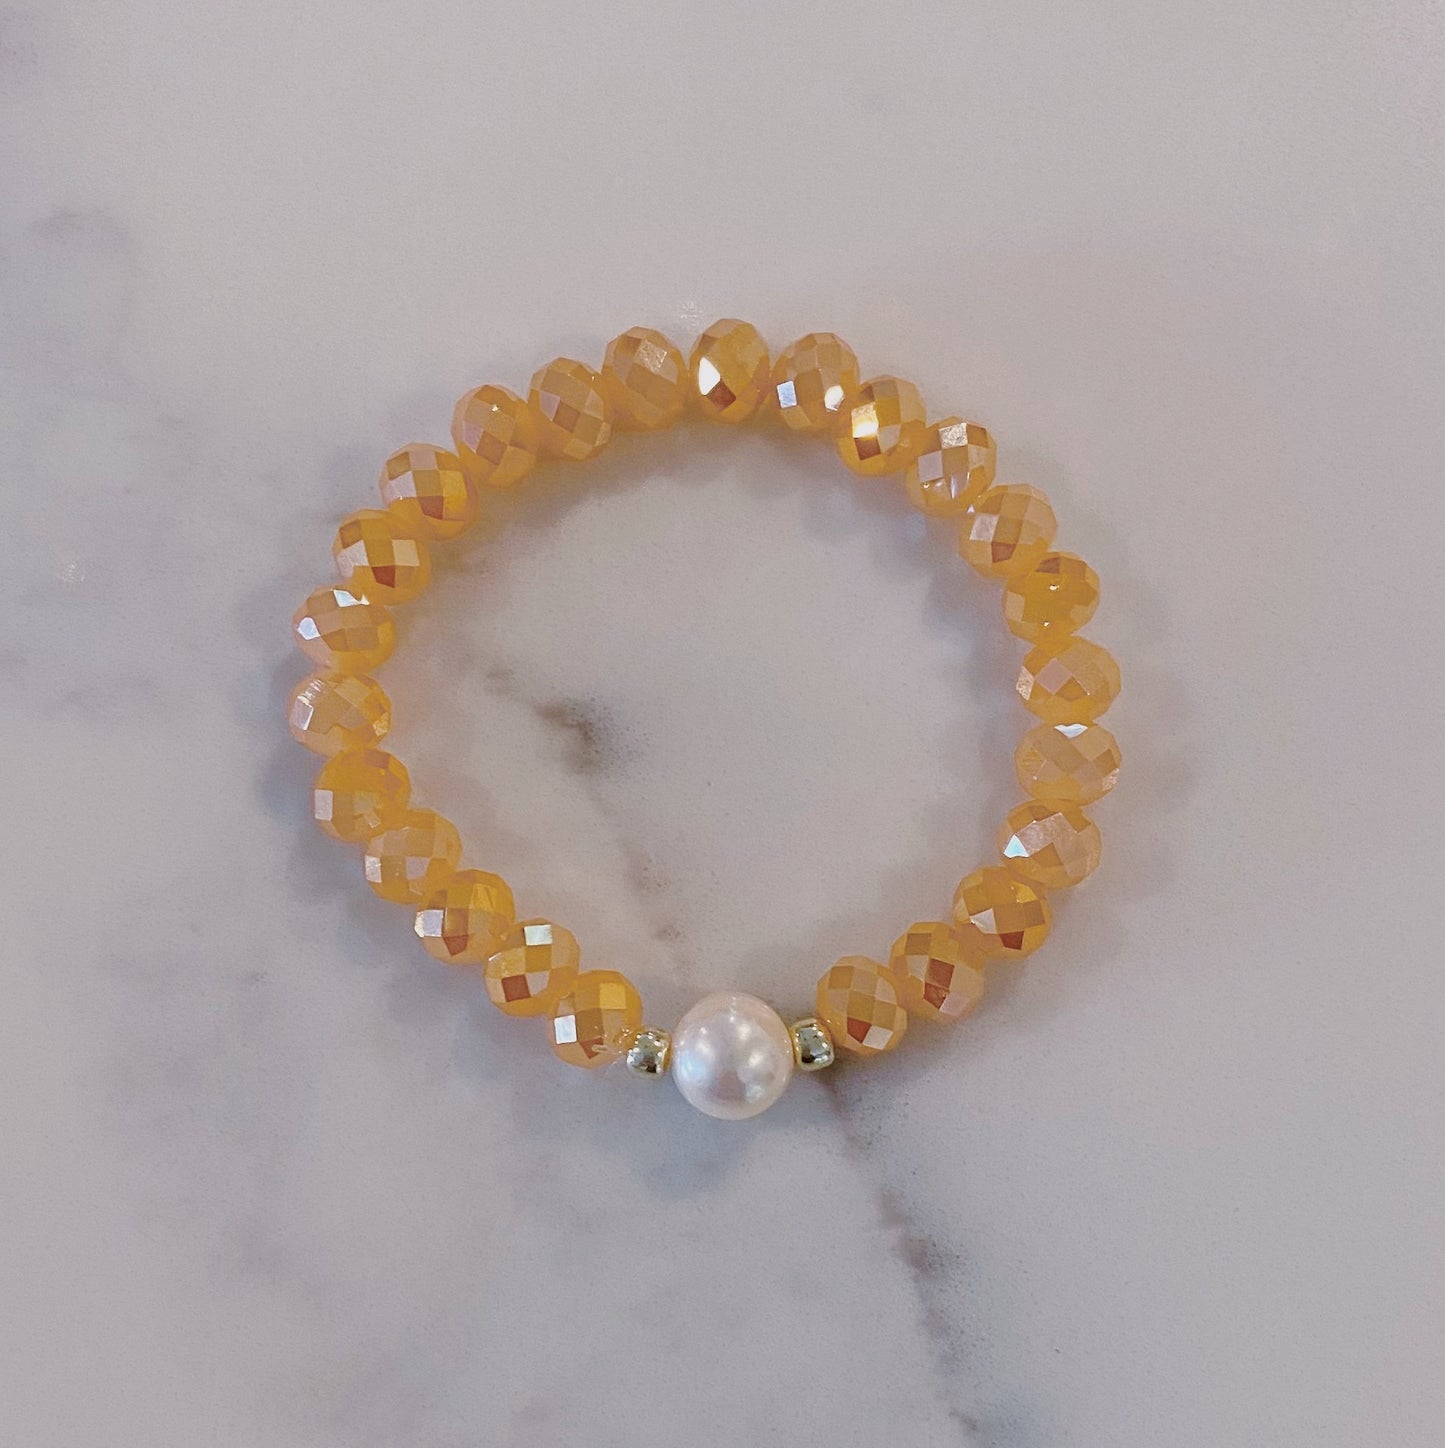 Peach faceted bead and pearl bracelet